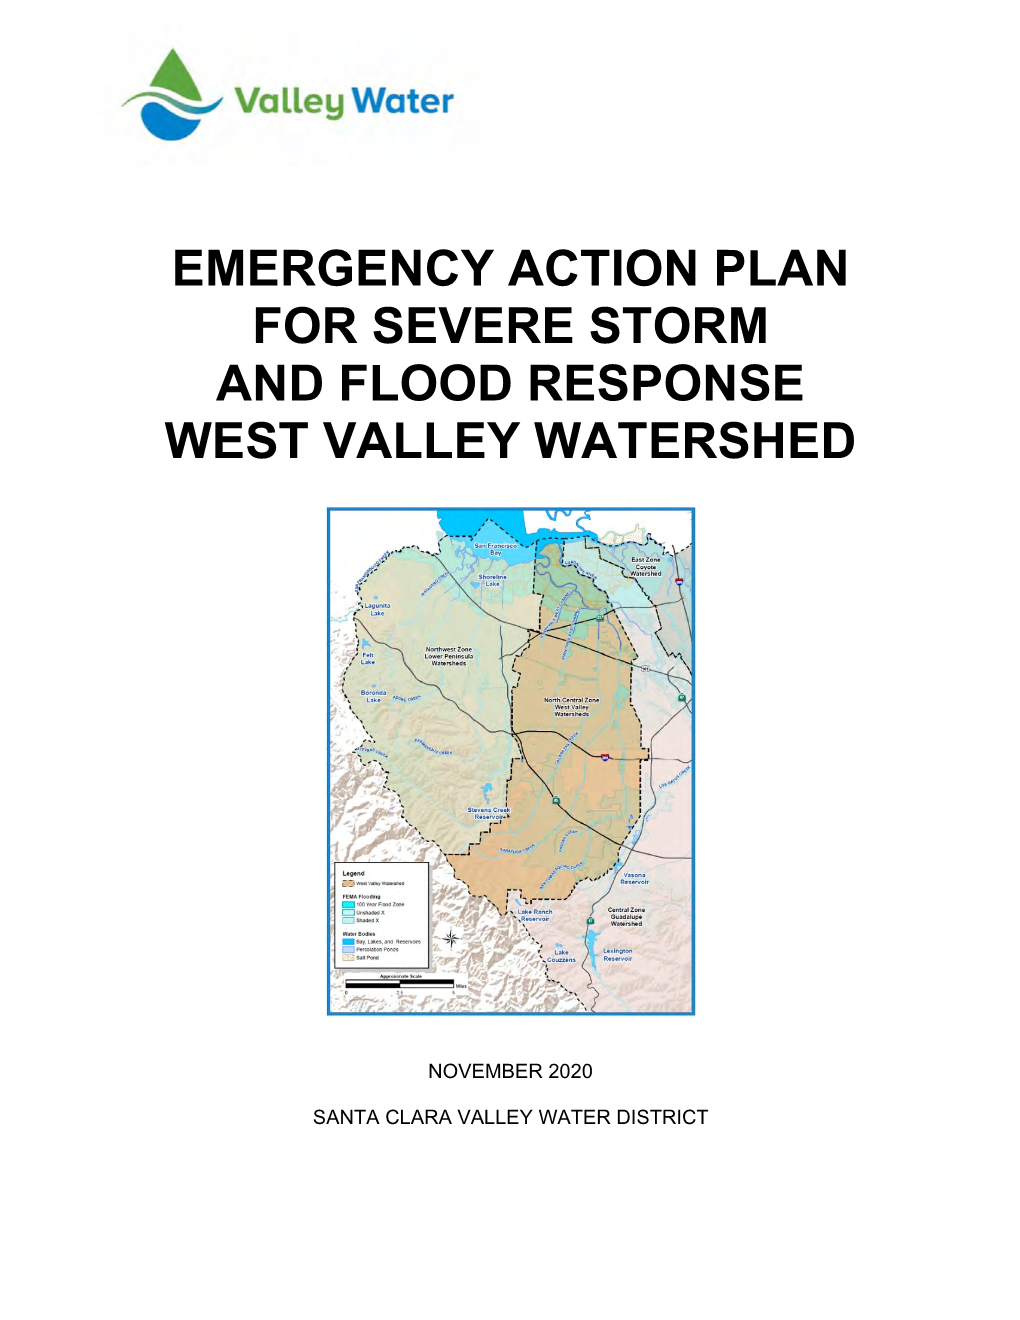 West Valley Watershed Emergency Action Plan R14513 (11/06/20)